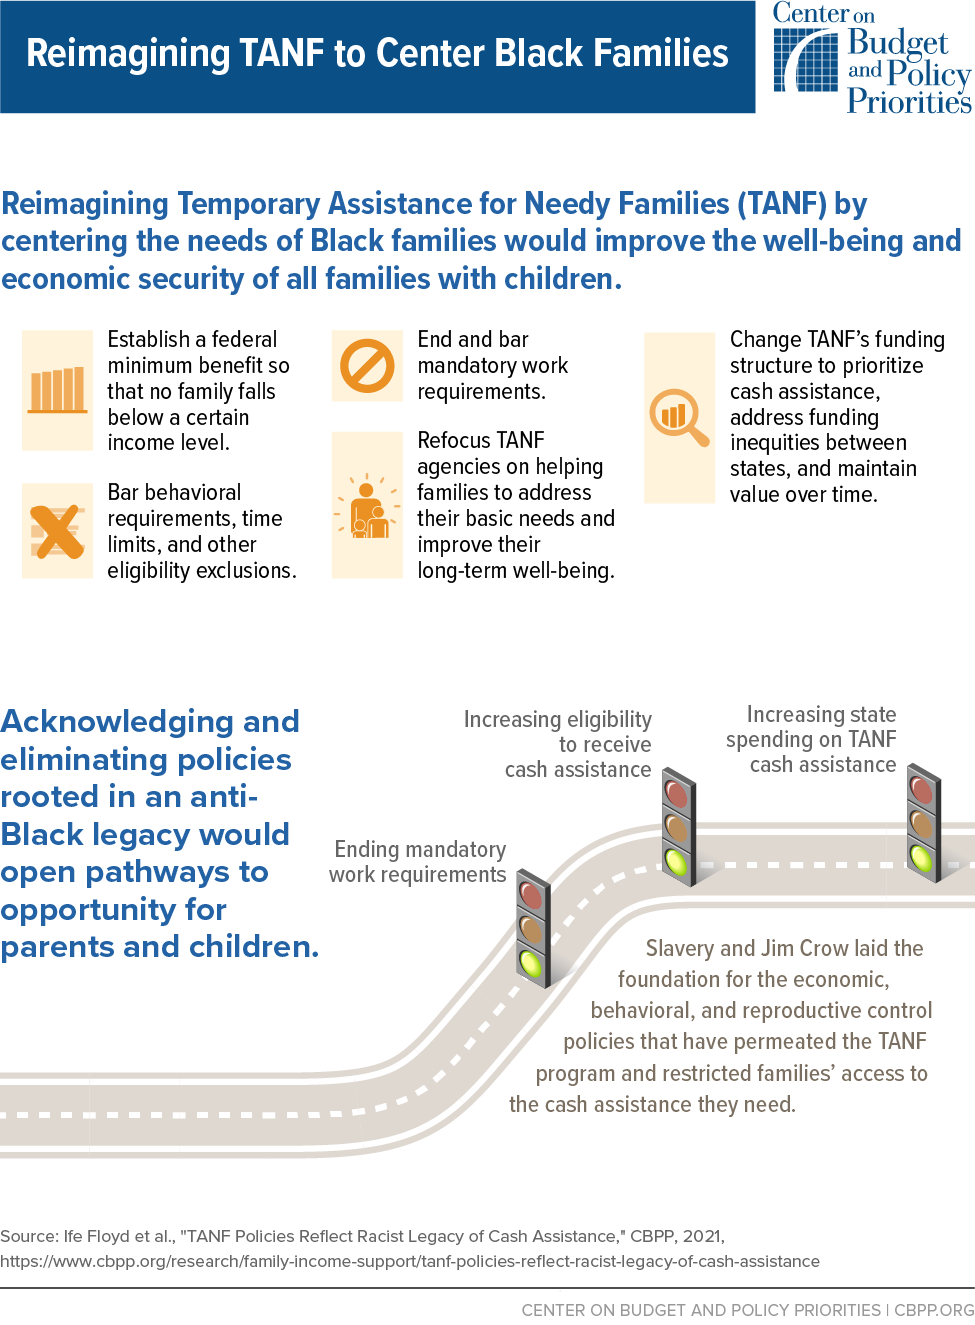 Infographic: Reimagining TANF to Center Black Families